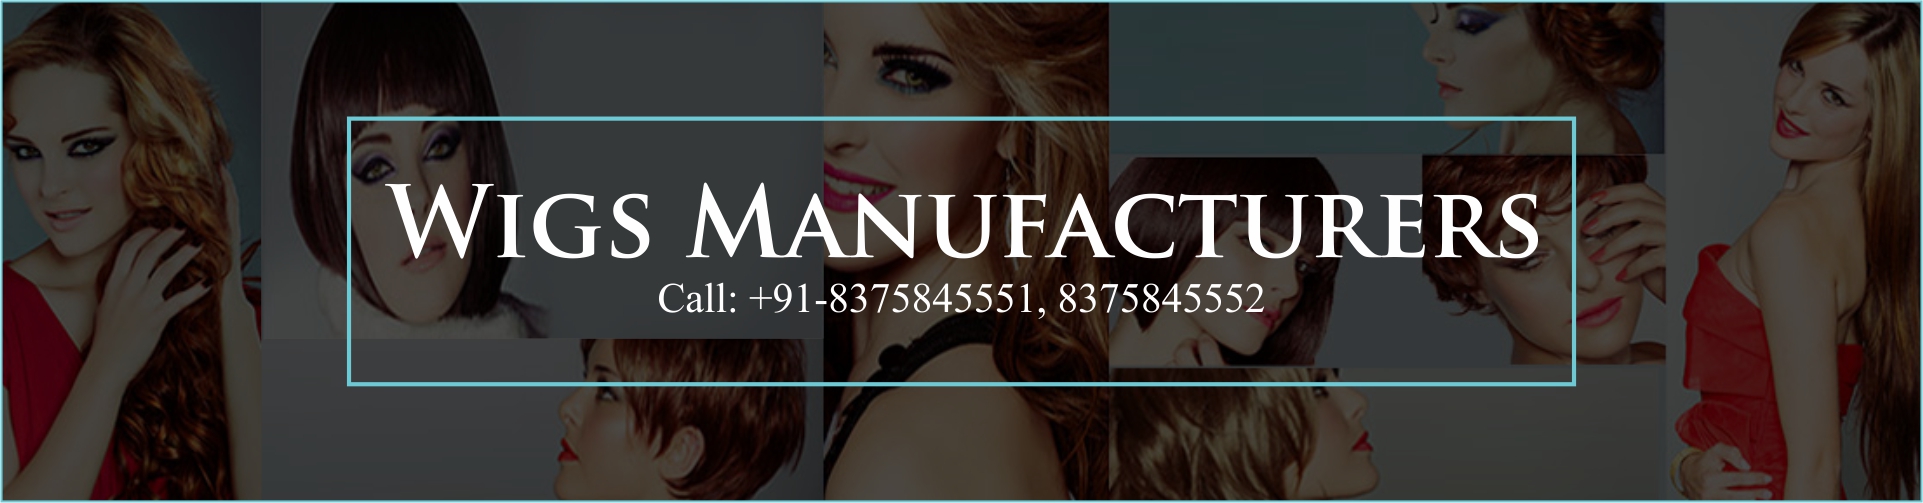 Wig Manufacturers in Delhi - Human Hair Wigs Suppliers & Traders in India